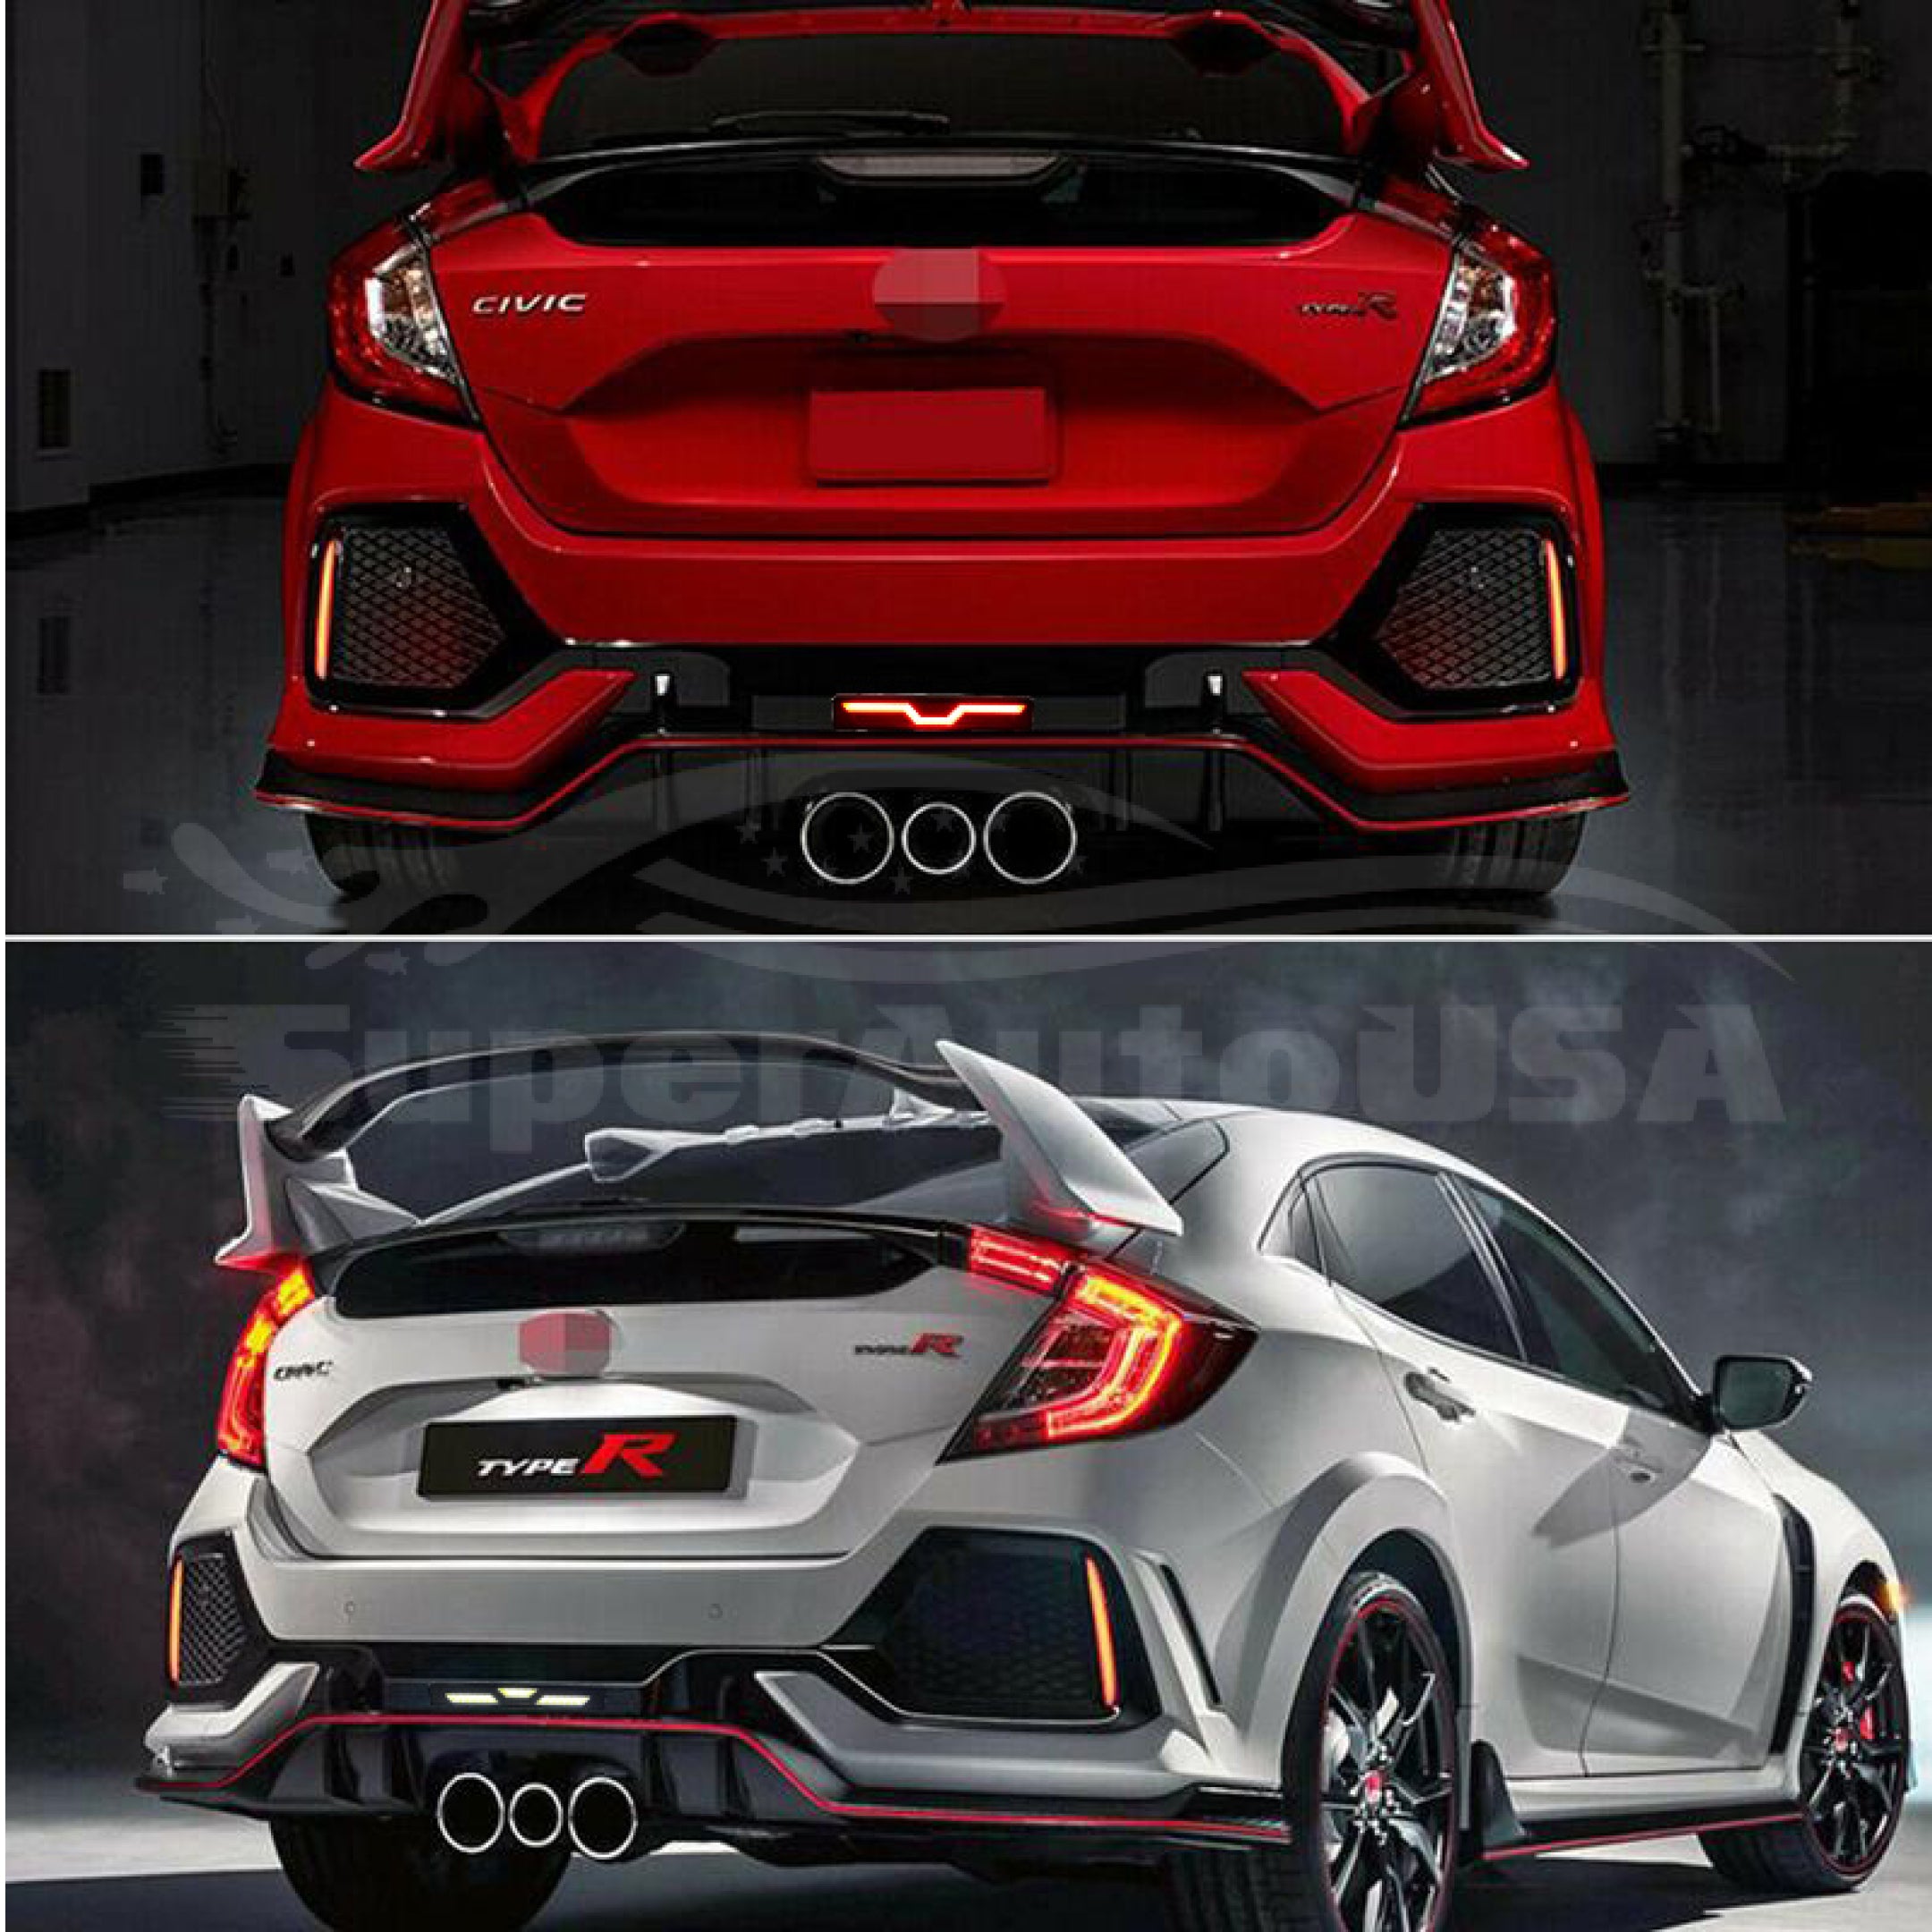 Fits 2016-2021 Honda Civic Hatchback Rear Diffuser Bumper with LED Brake Light Extension (Extra Gloss Carbon Fiber Print and Unpainted Black)